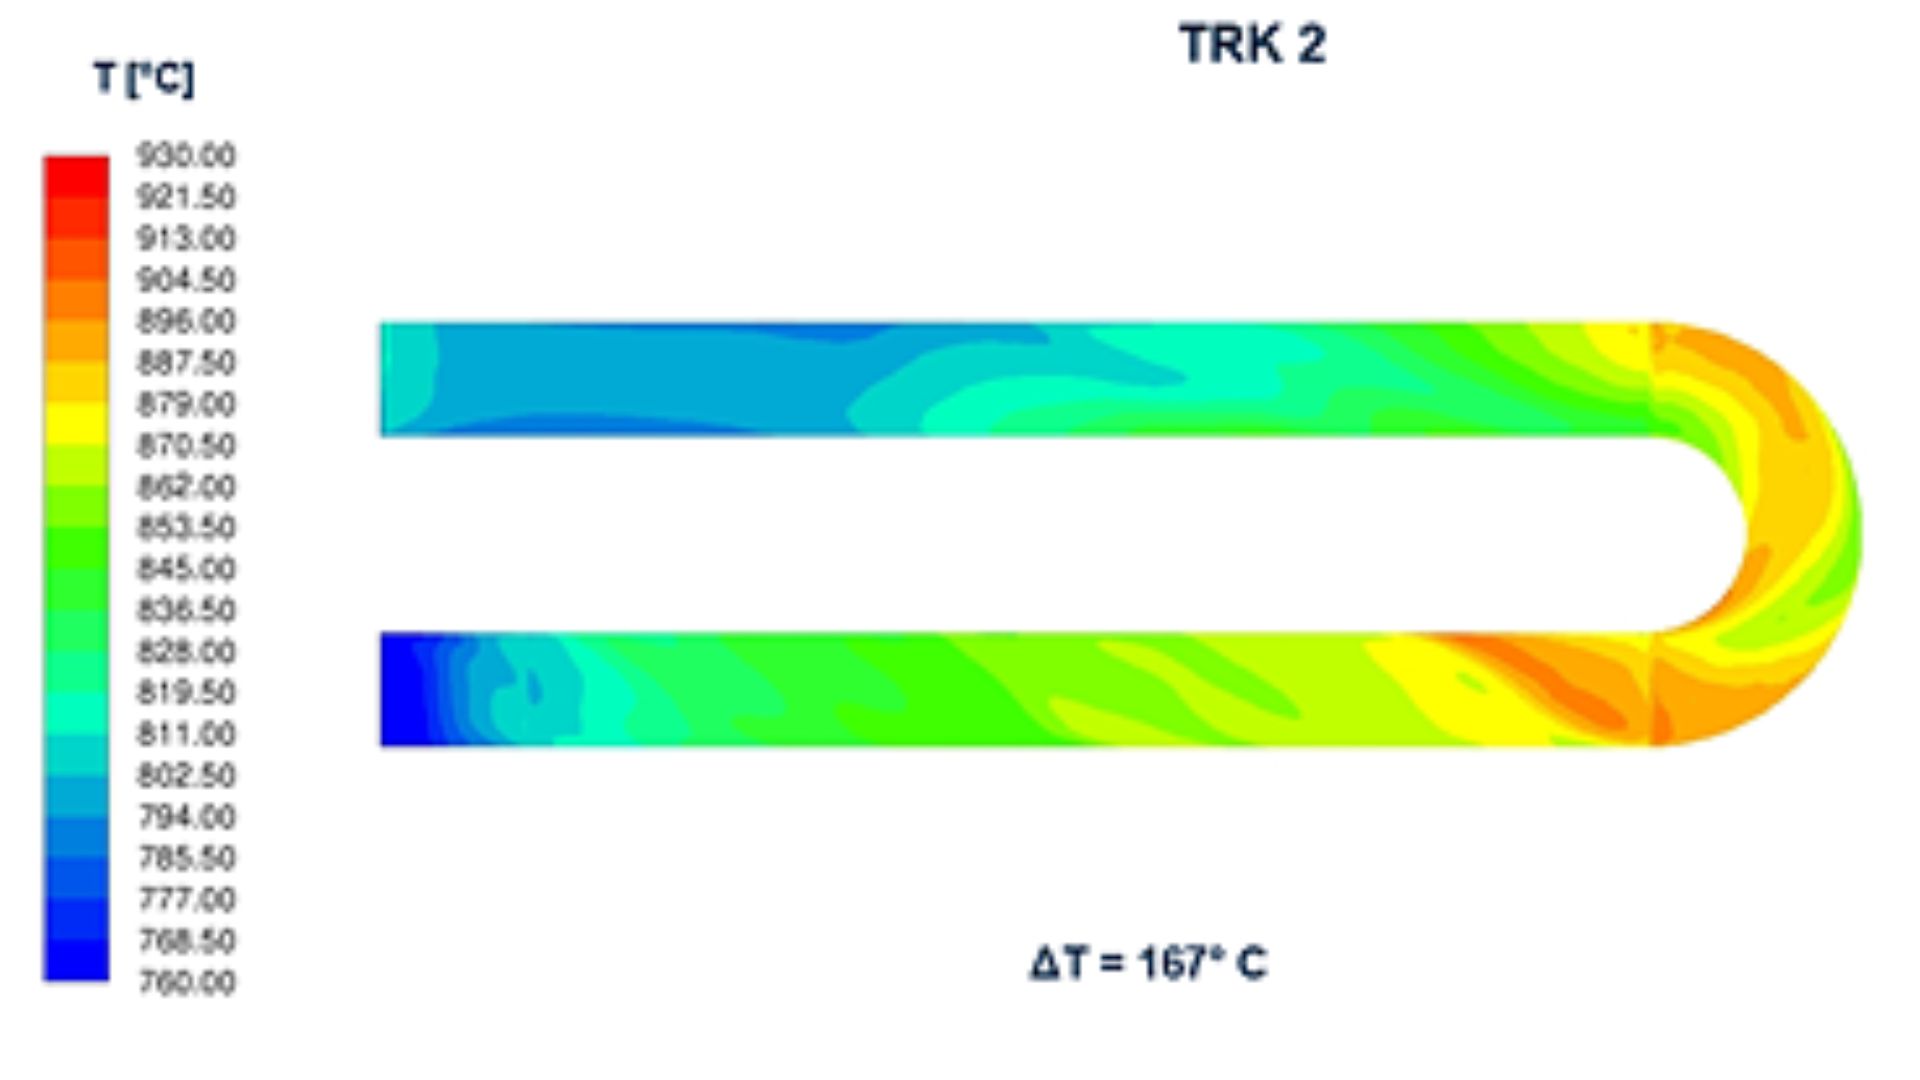 CFD simulation of a TRK burner in a U-shaped radiant tube predicting the temperature distribution on the radiant tube surface.